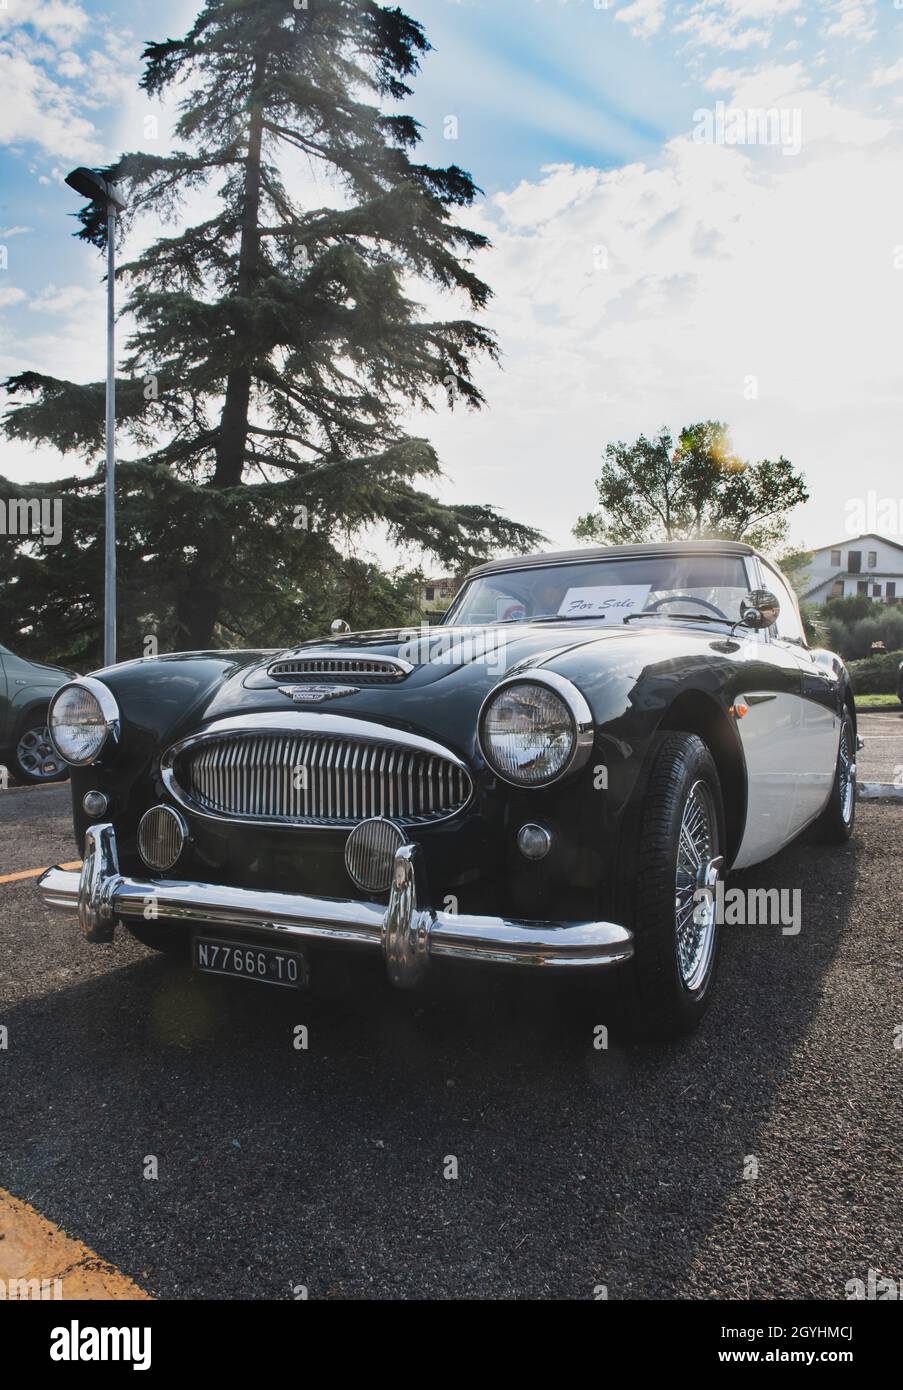 Italy, september 11 2021. Vallelunga classic. Sixties vintage car for sale in outdoors market  Austin Healey 3000 mkII front view no people Stock Photo